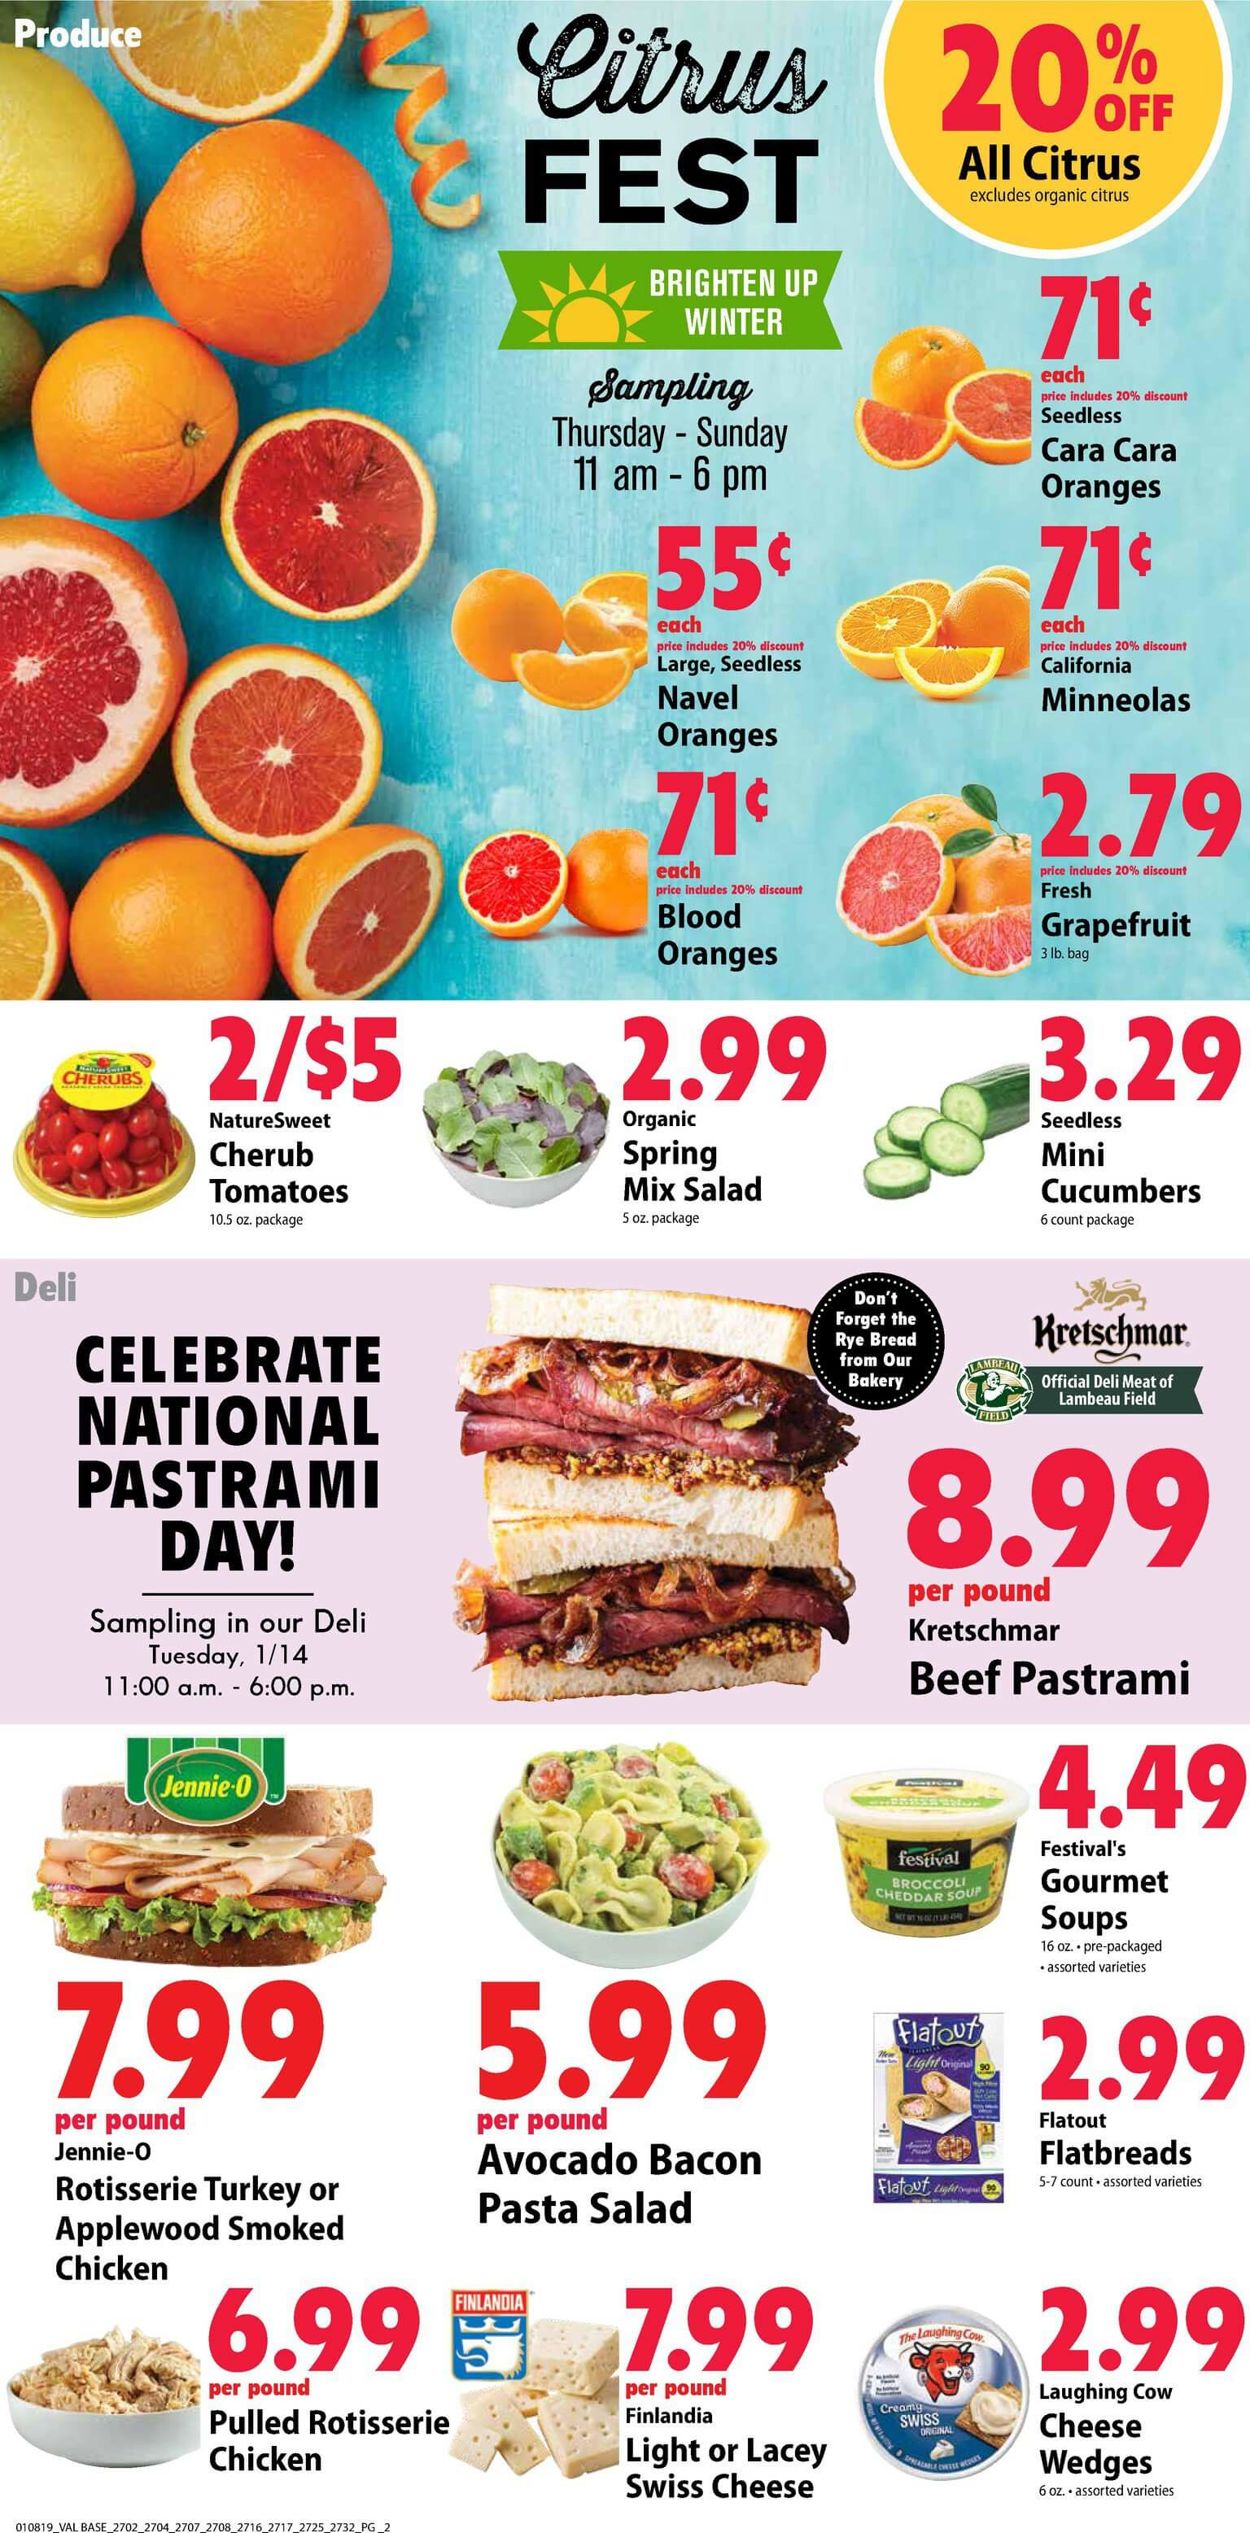 Festival Foods Current weekly ad 01/08 01/14/2020 [2]